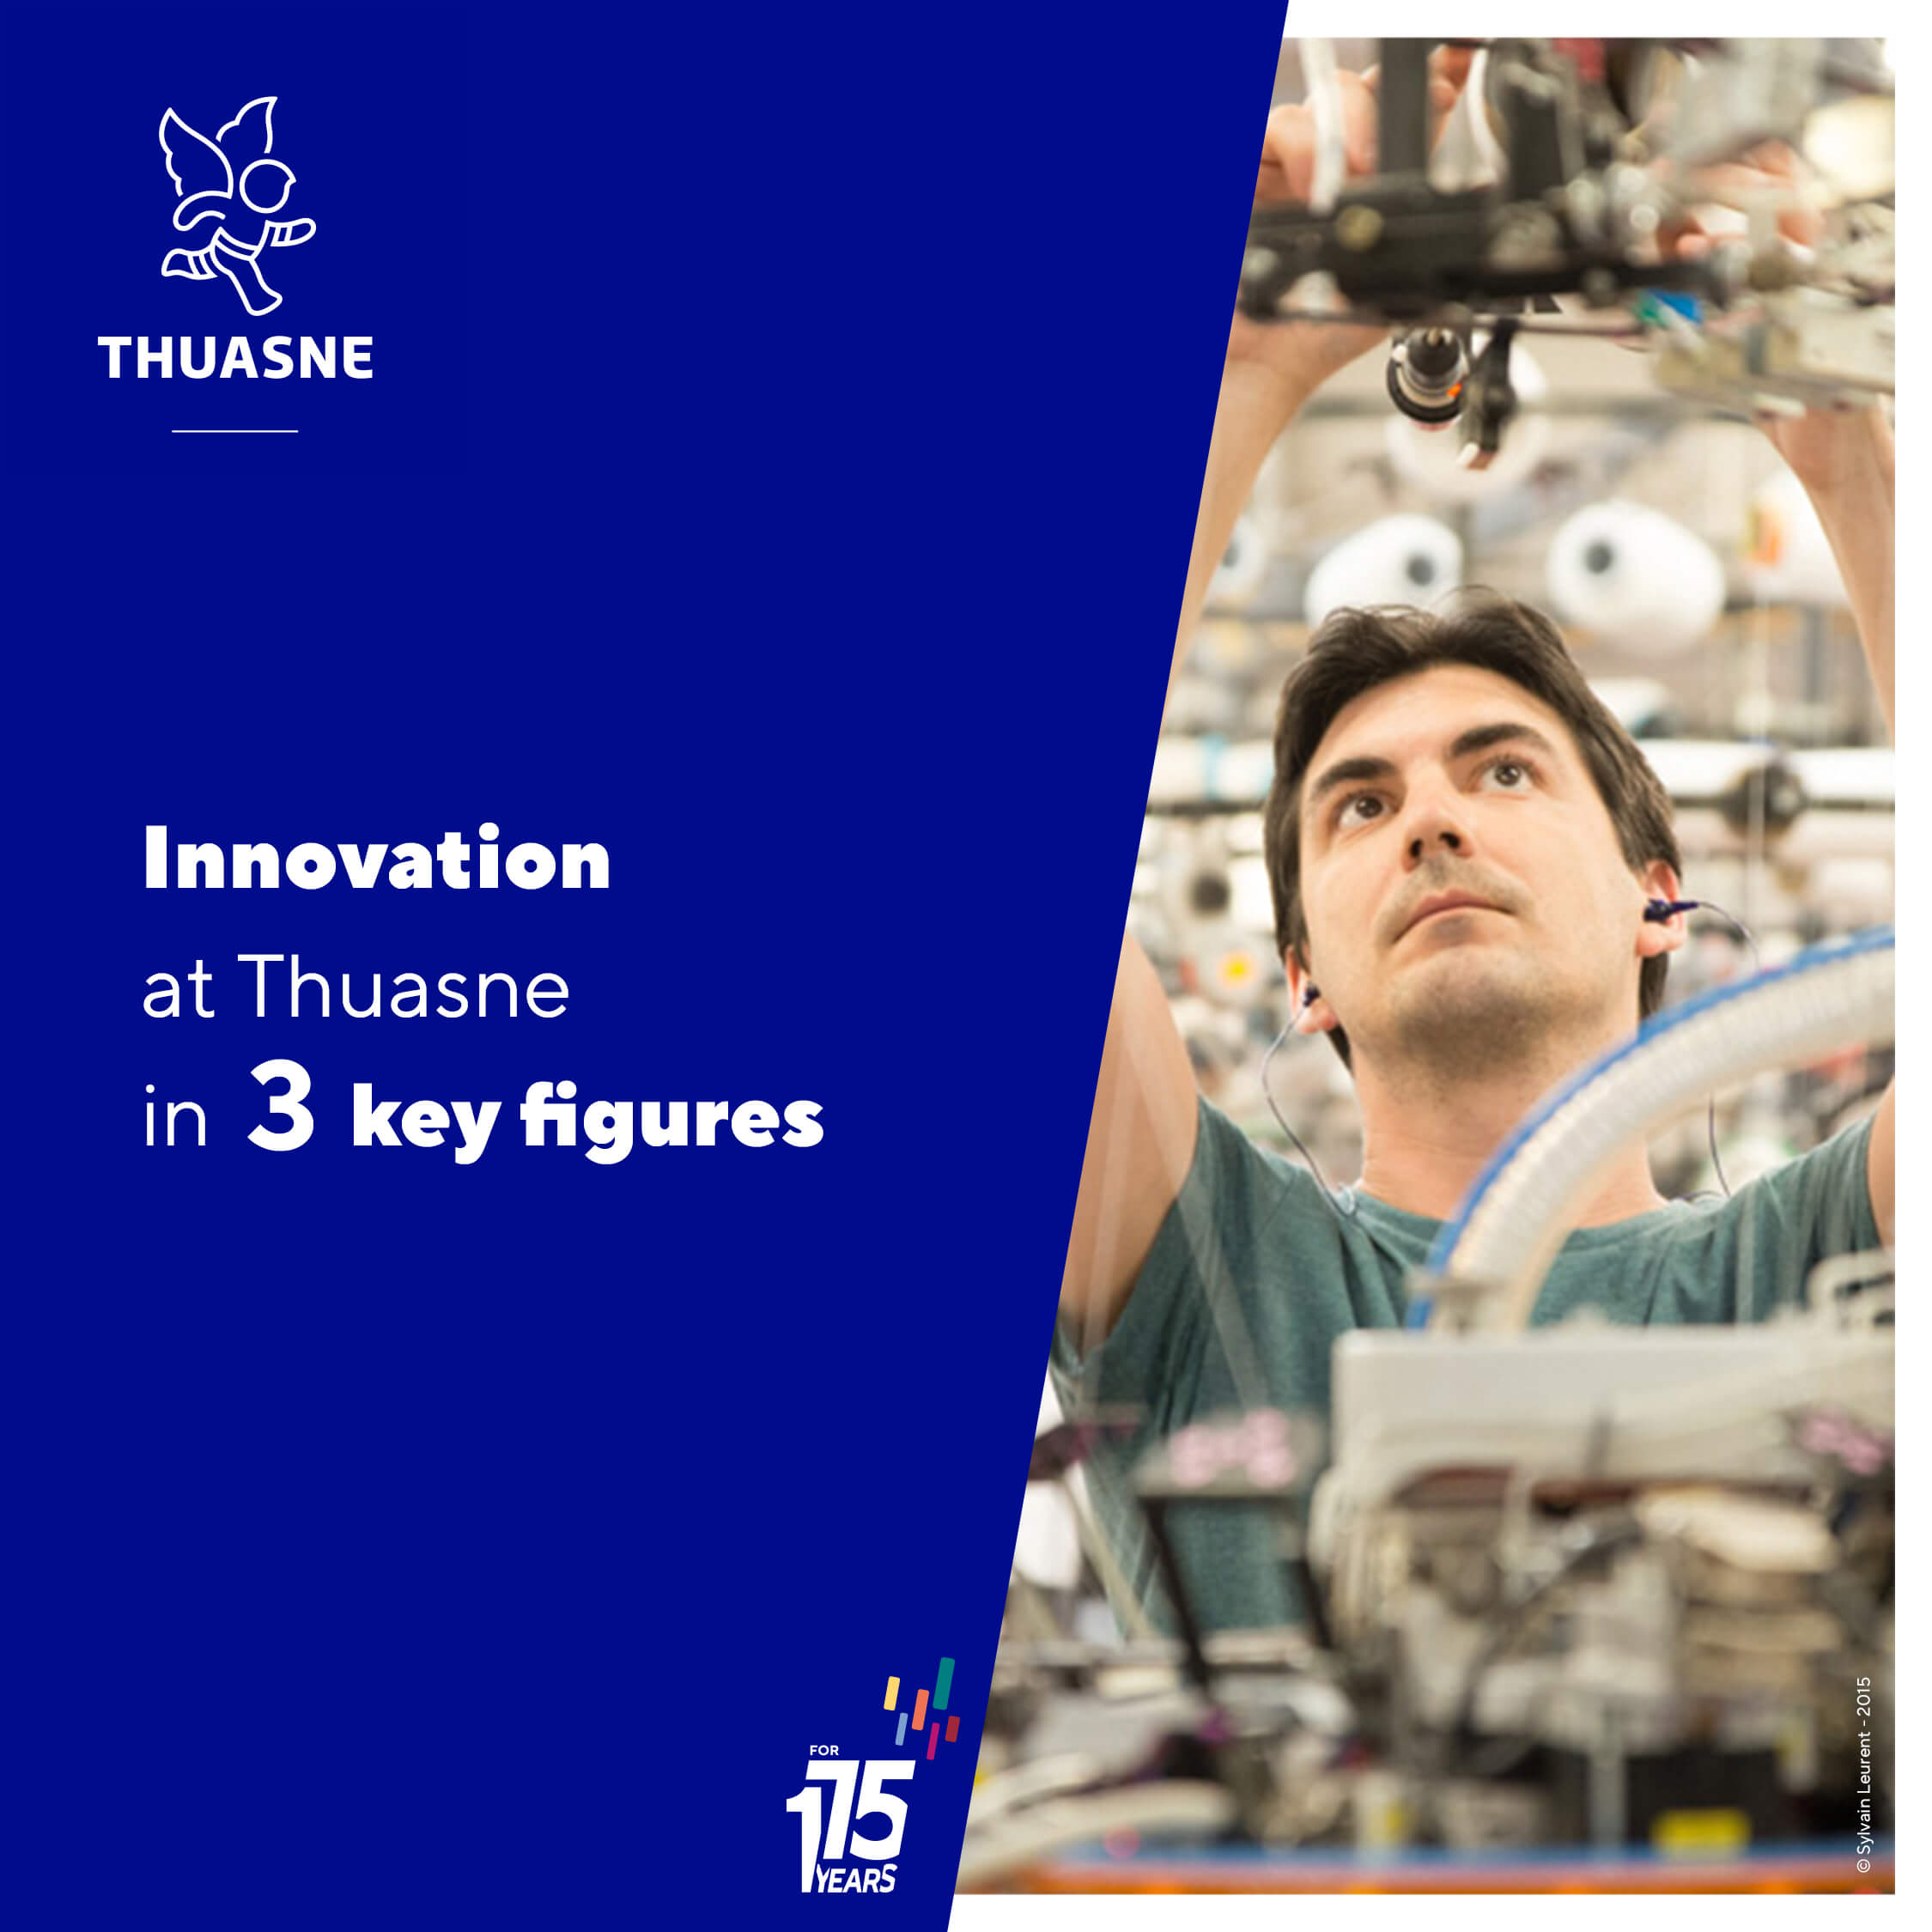 Thuasne: Delivering innovation in healthcare - Image